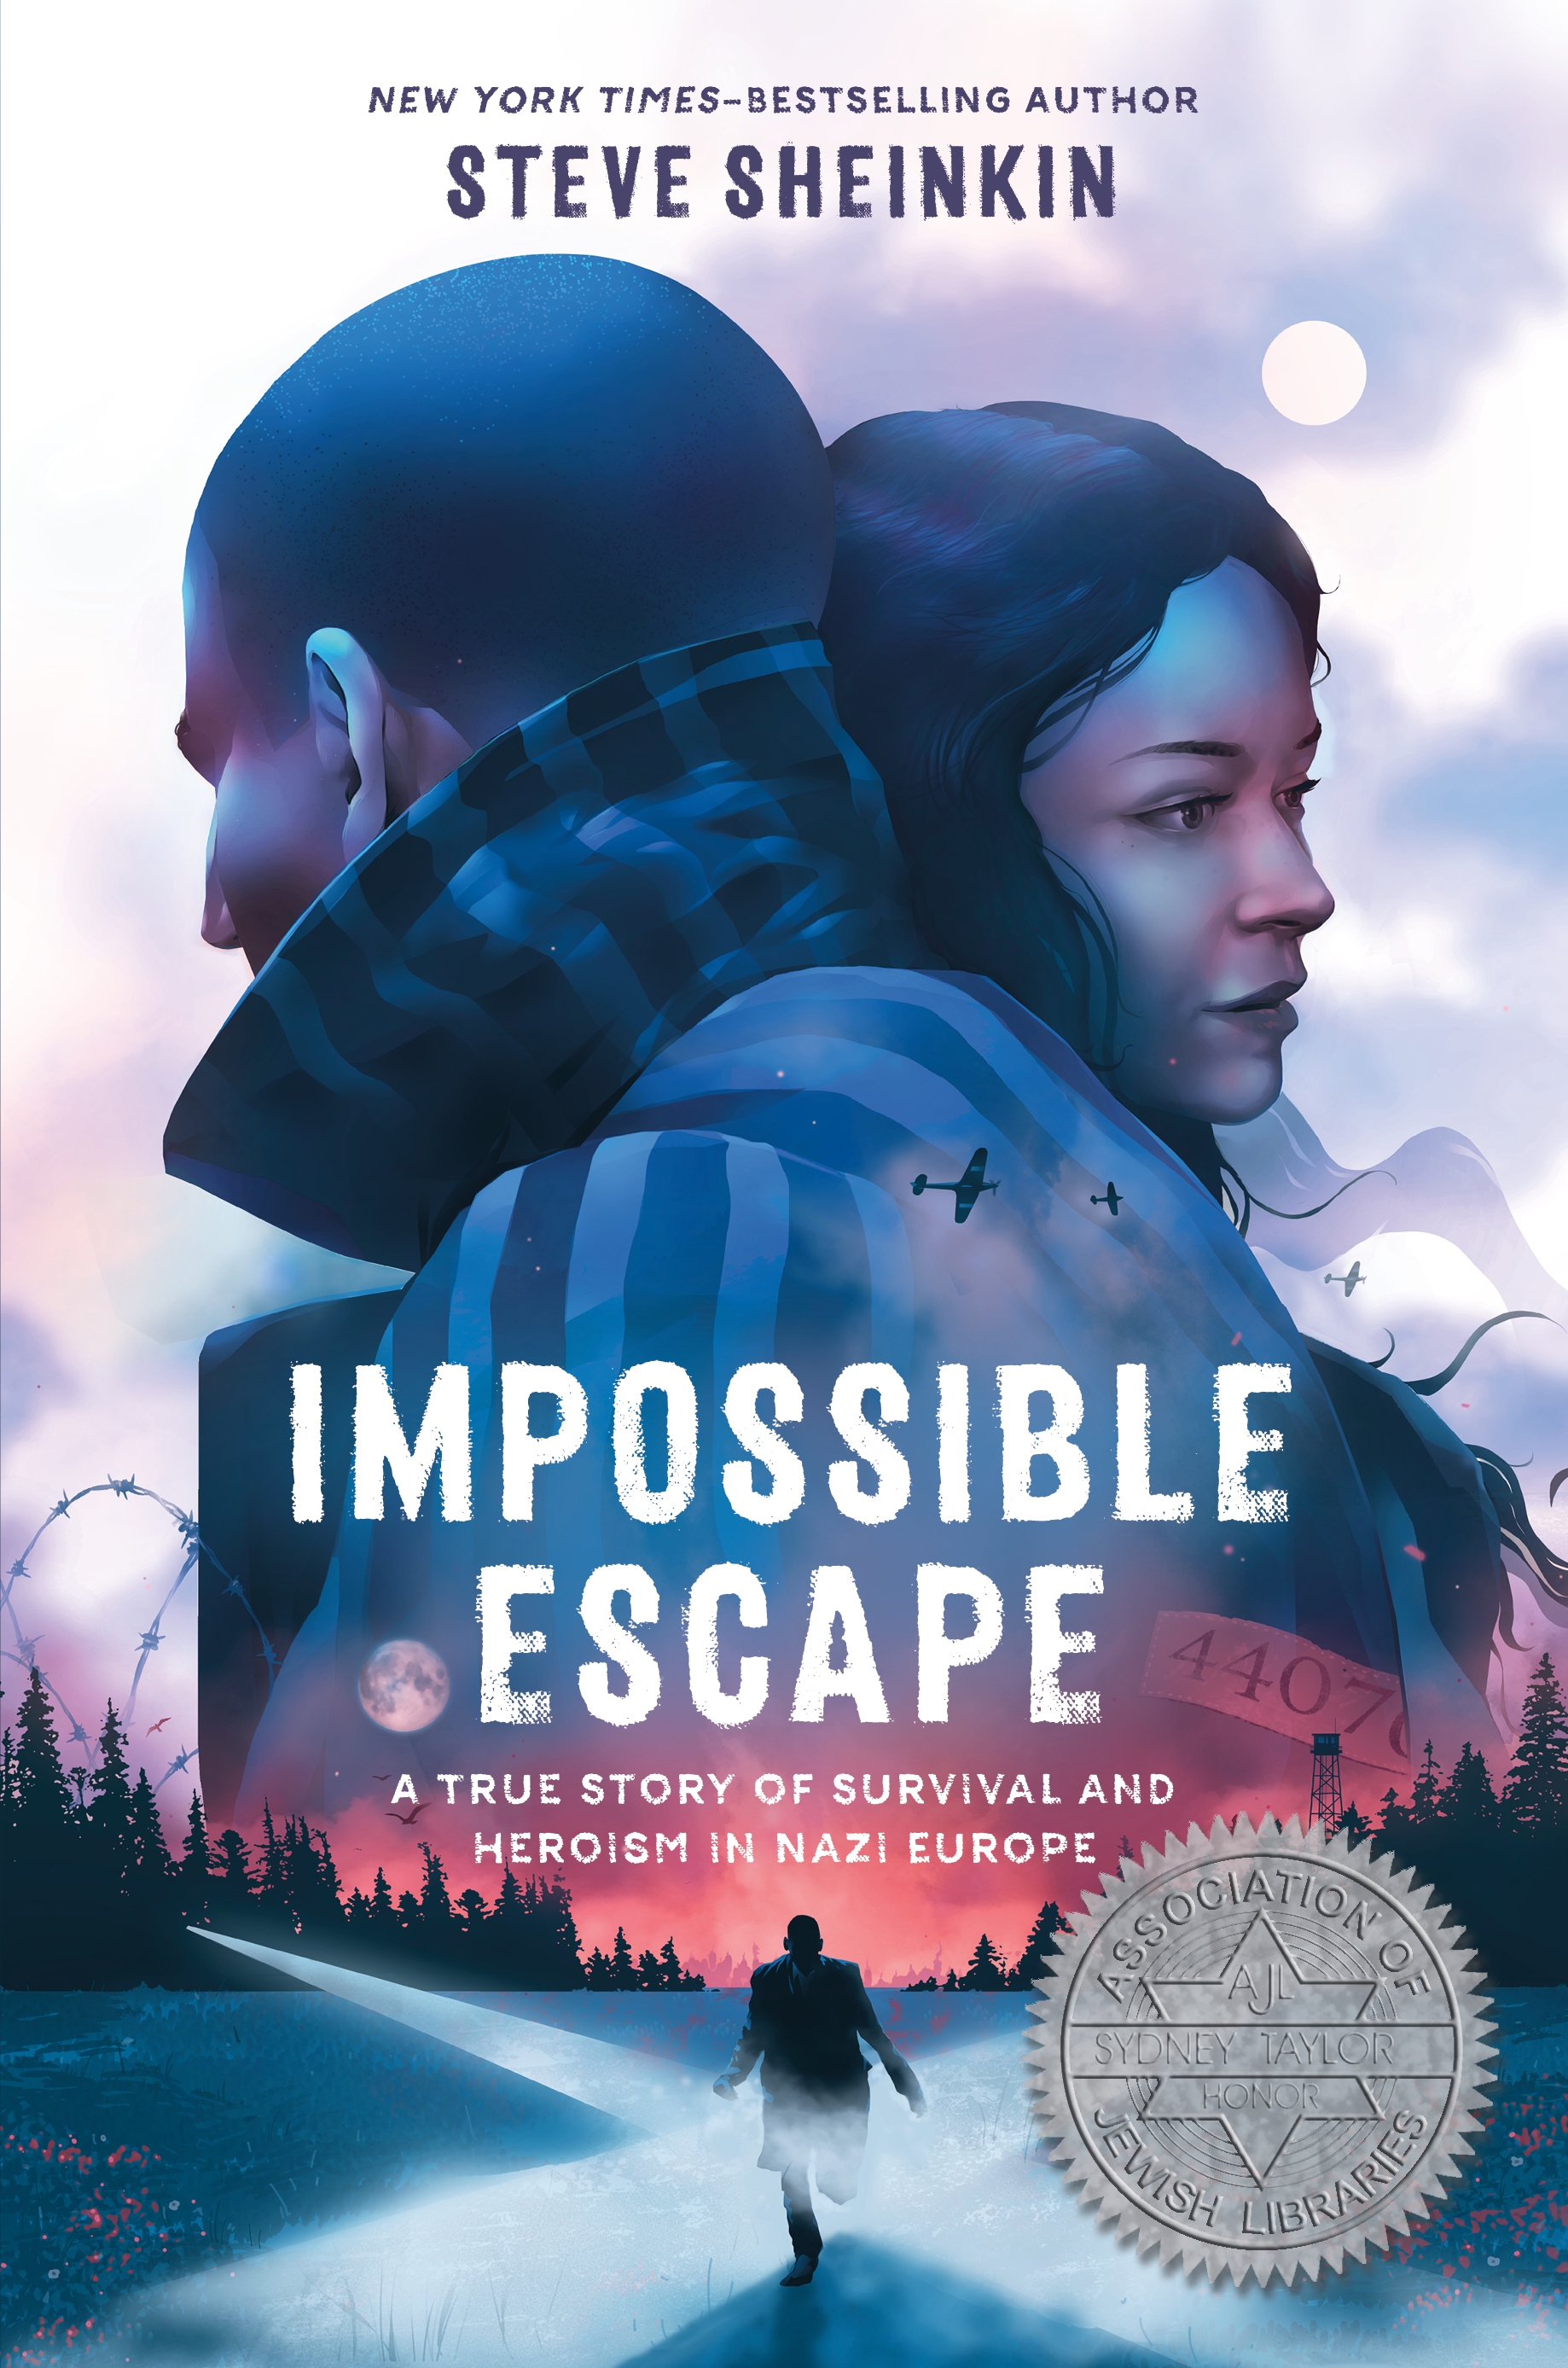 Impossible Escape A True Story of Survival and Heroism in Nazi Europe cover image